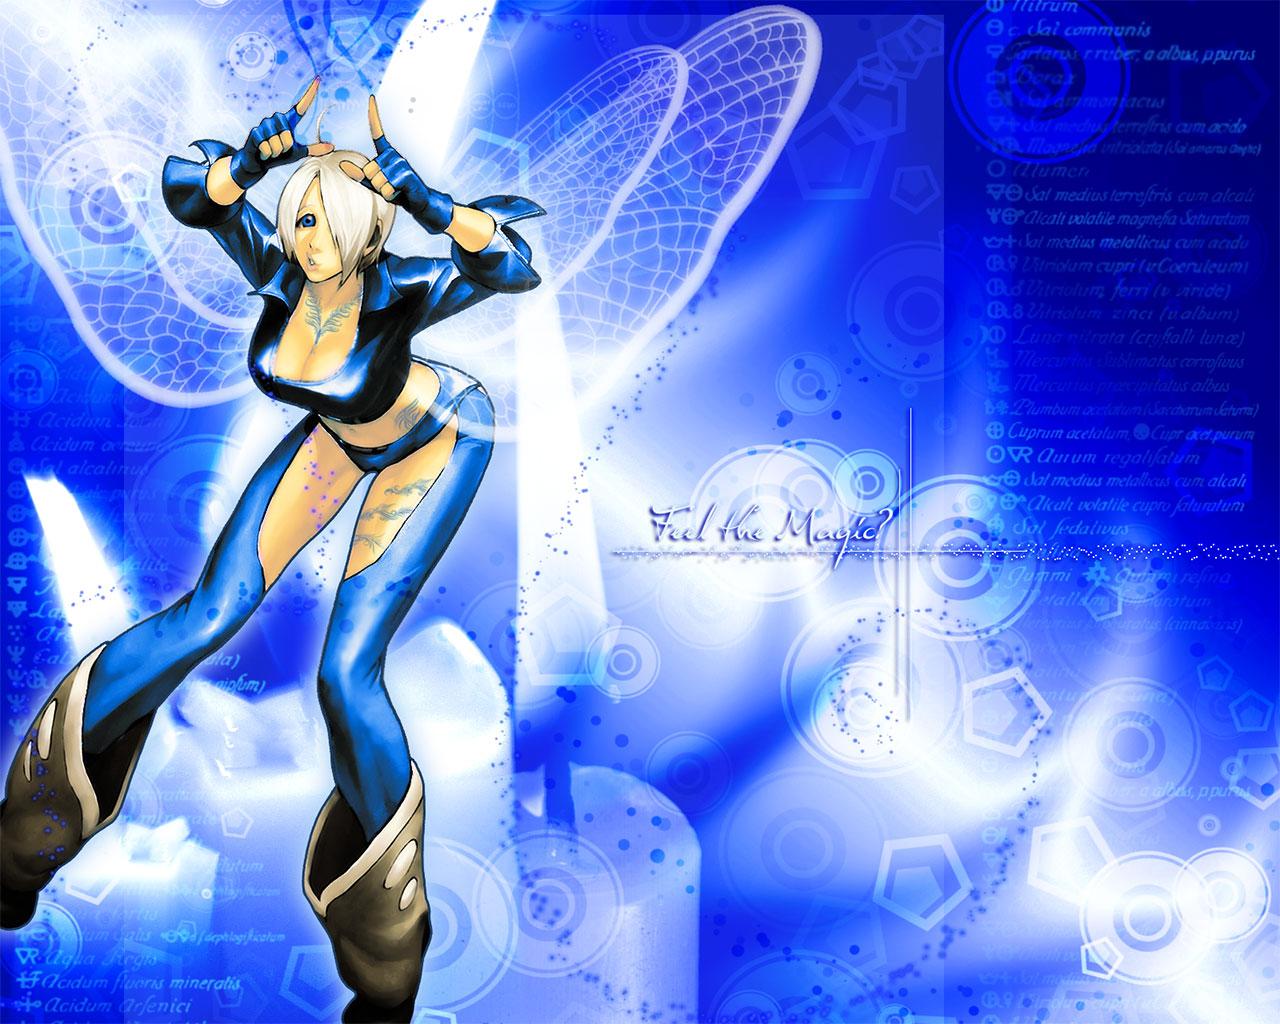 King of Fighters Wallpaper: [Feel the Magic? ] v.Blue